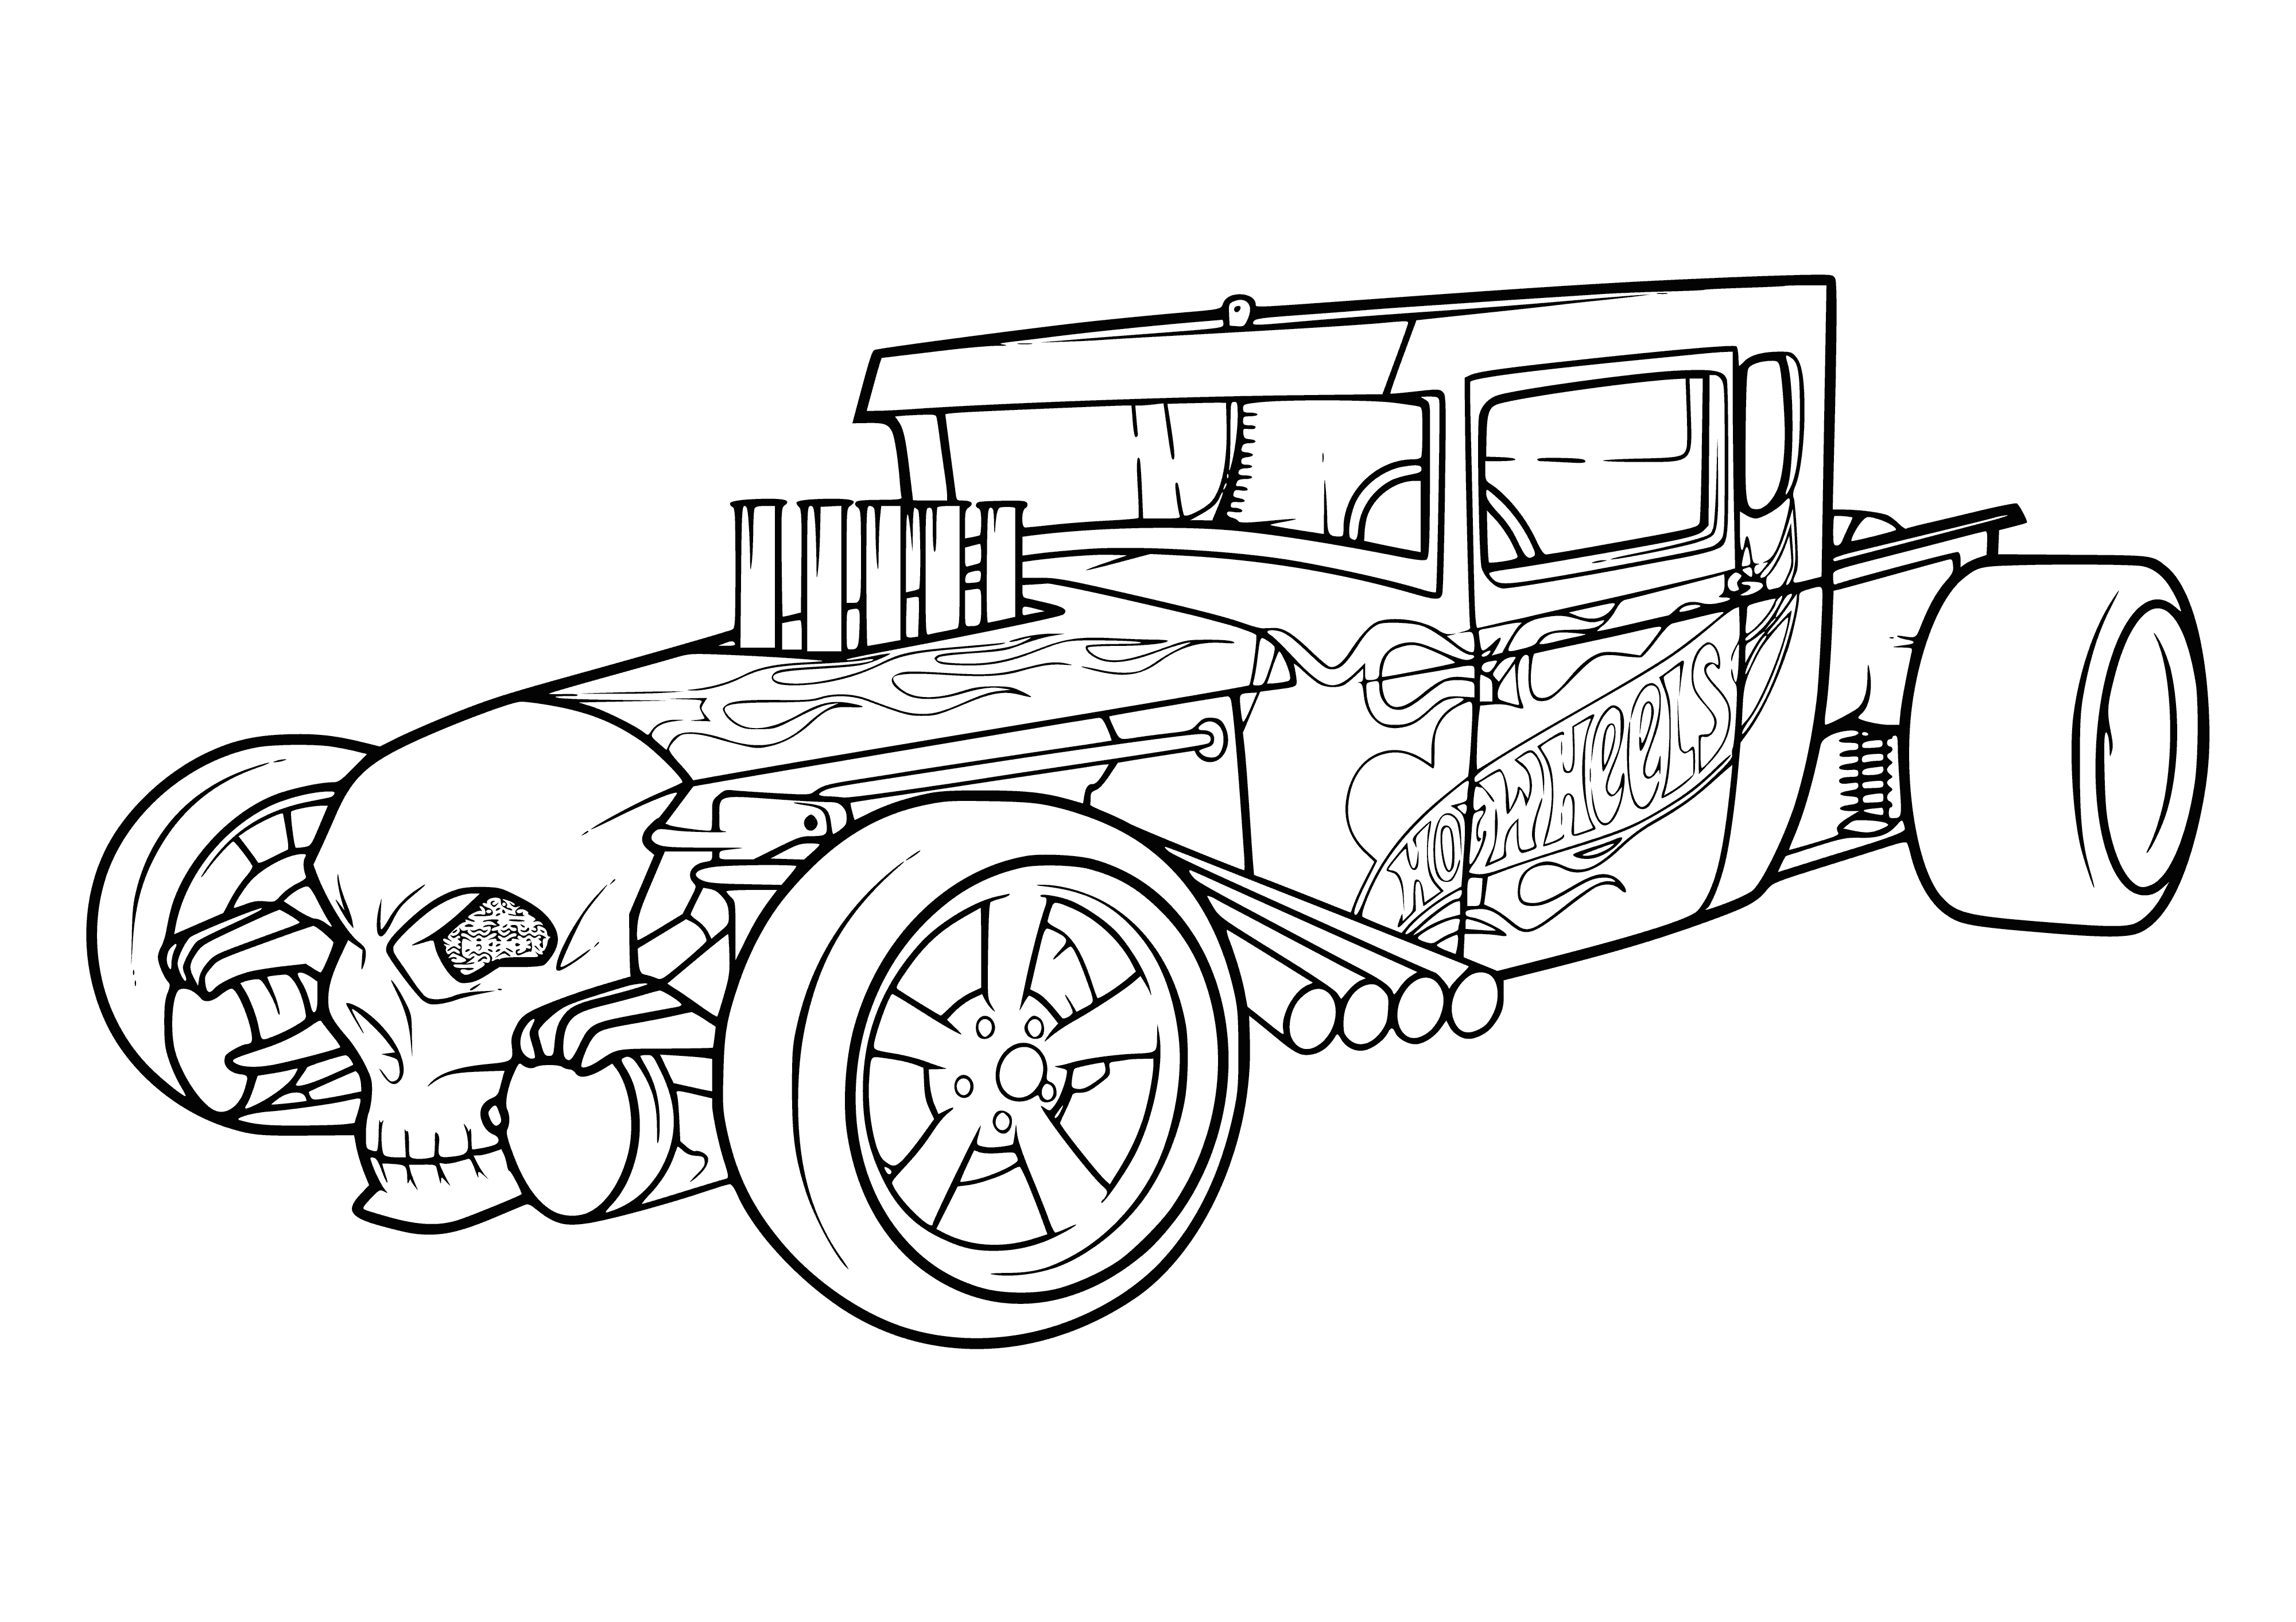 coloring page: Roadster car w/two seats, convertible top, white exterior/black interior, manual transmission.